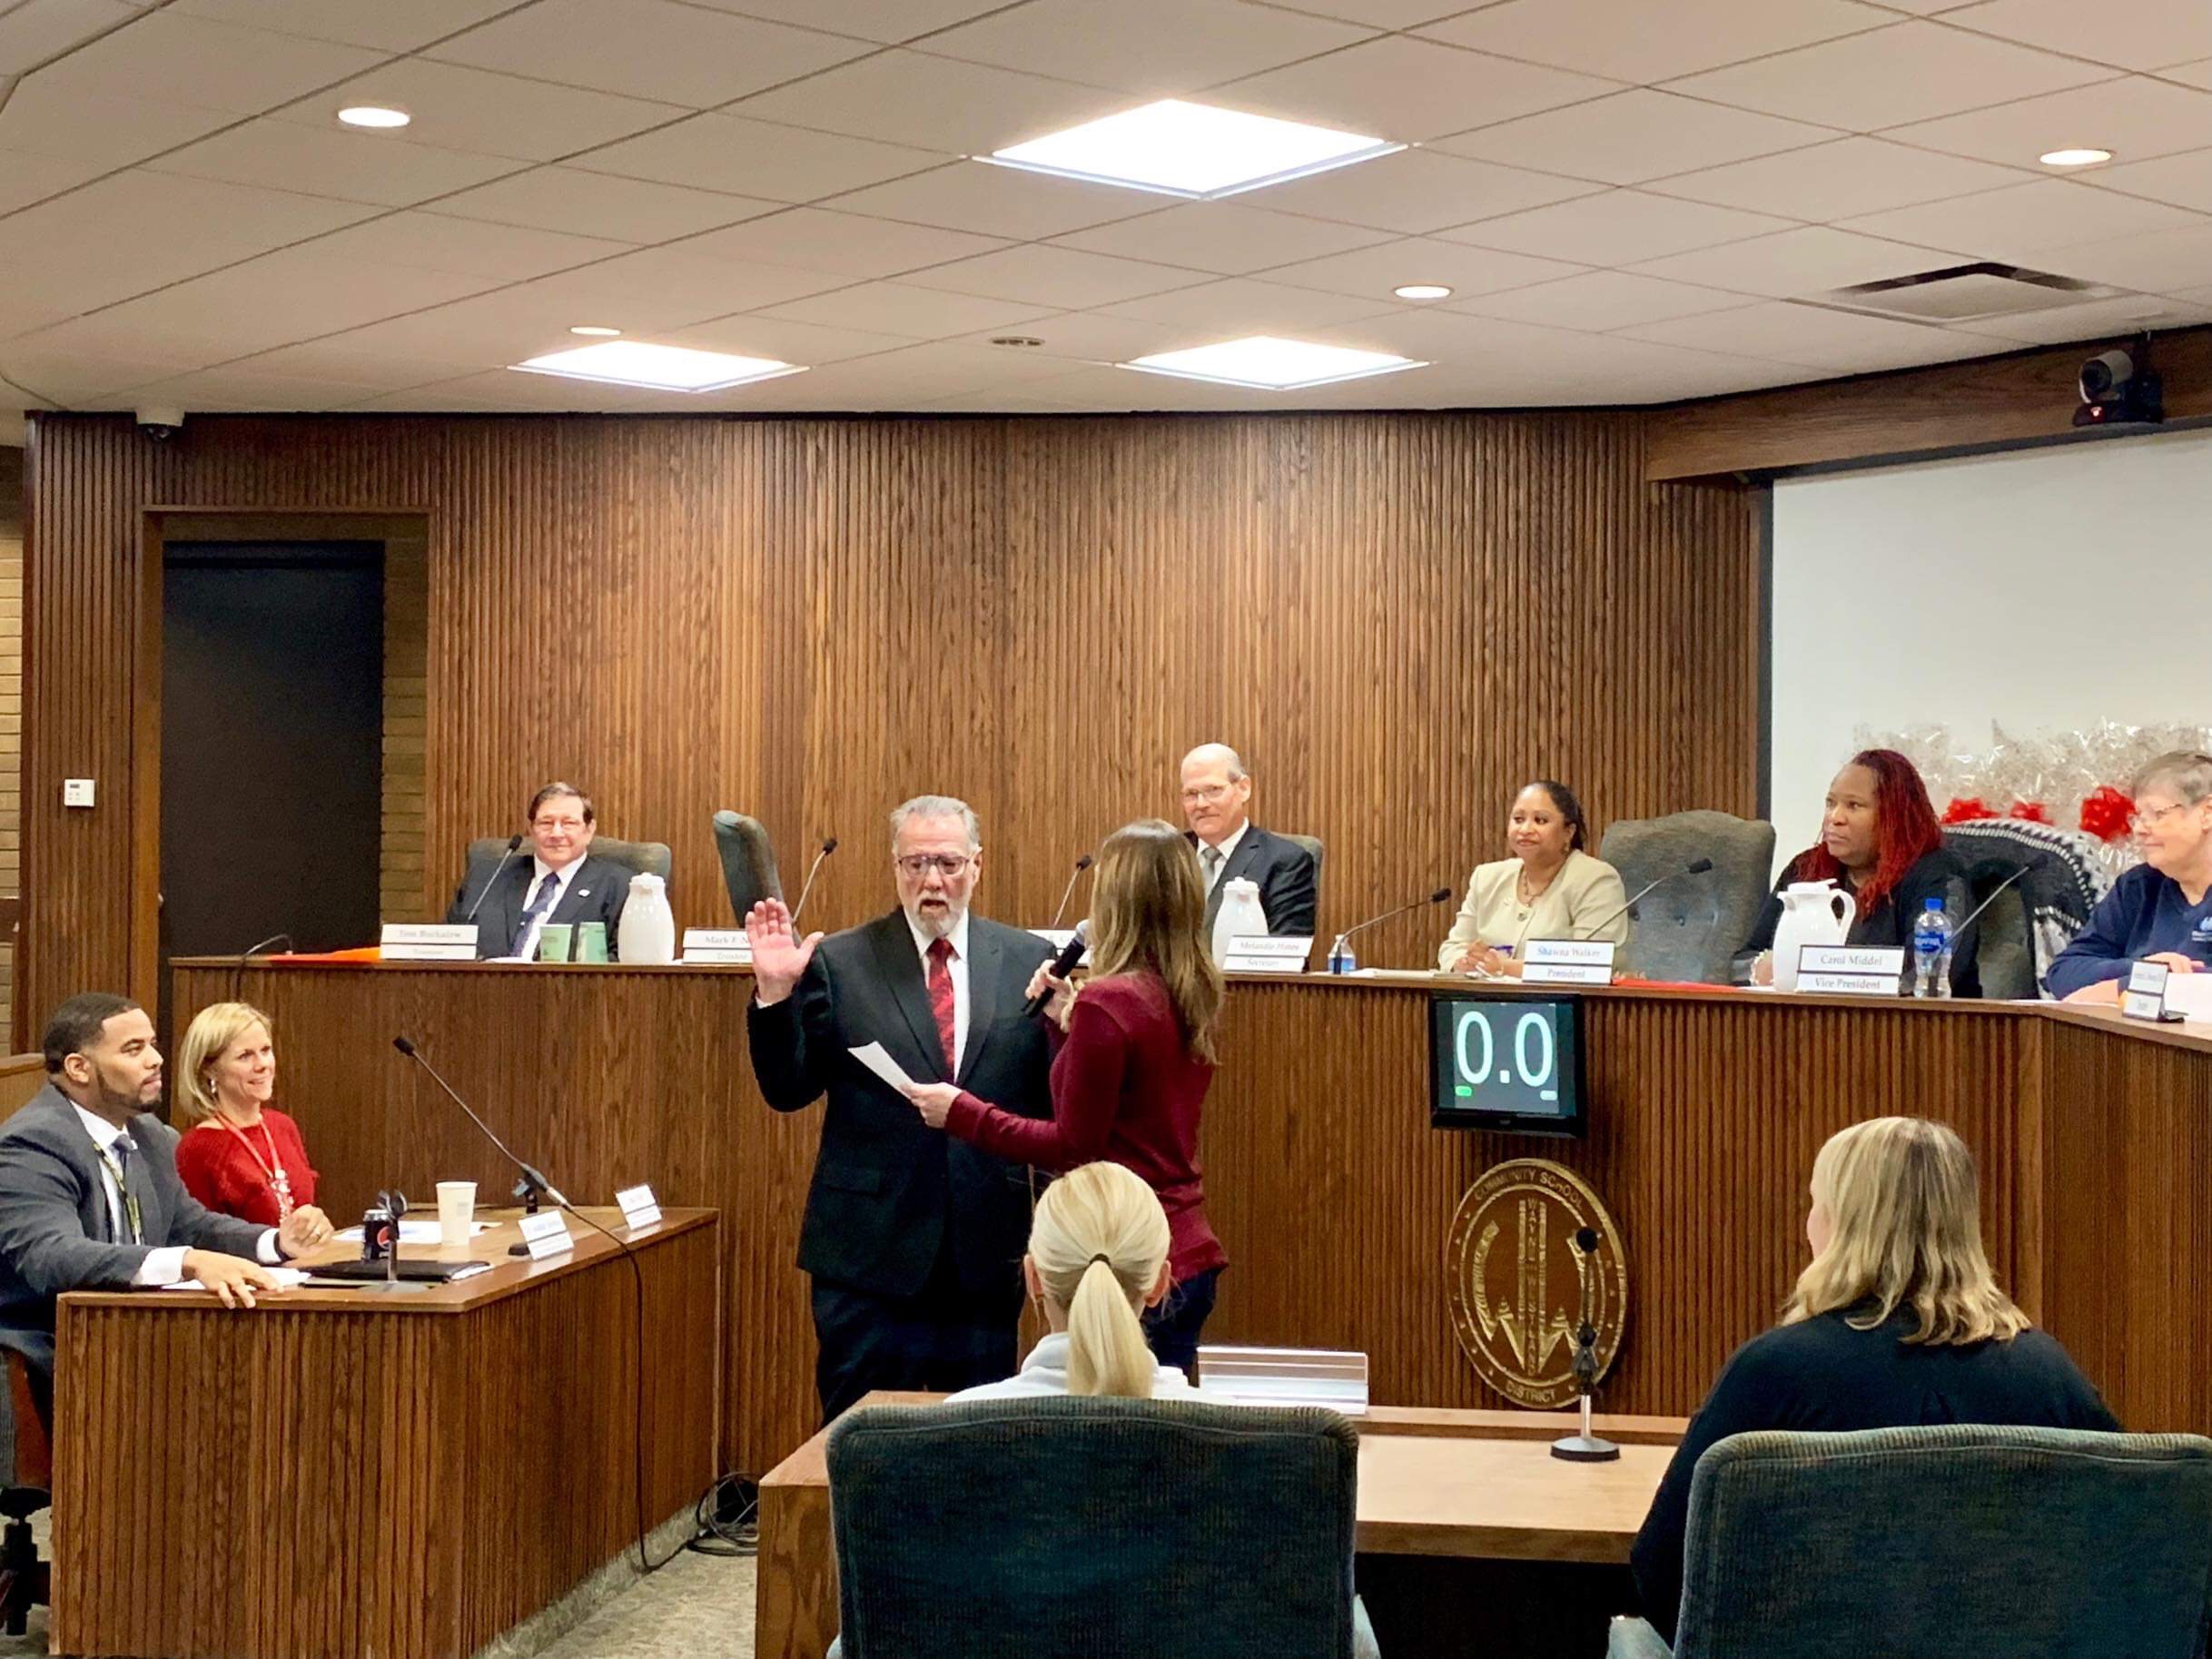 Newly elected Board member Mark Neal was sworn in at the Jan. 2019 meeting and was elected as Board secretary.